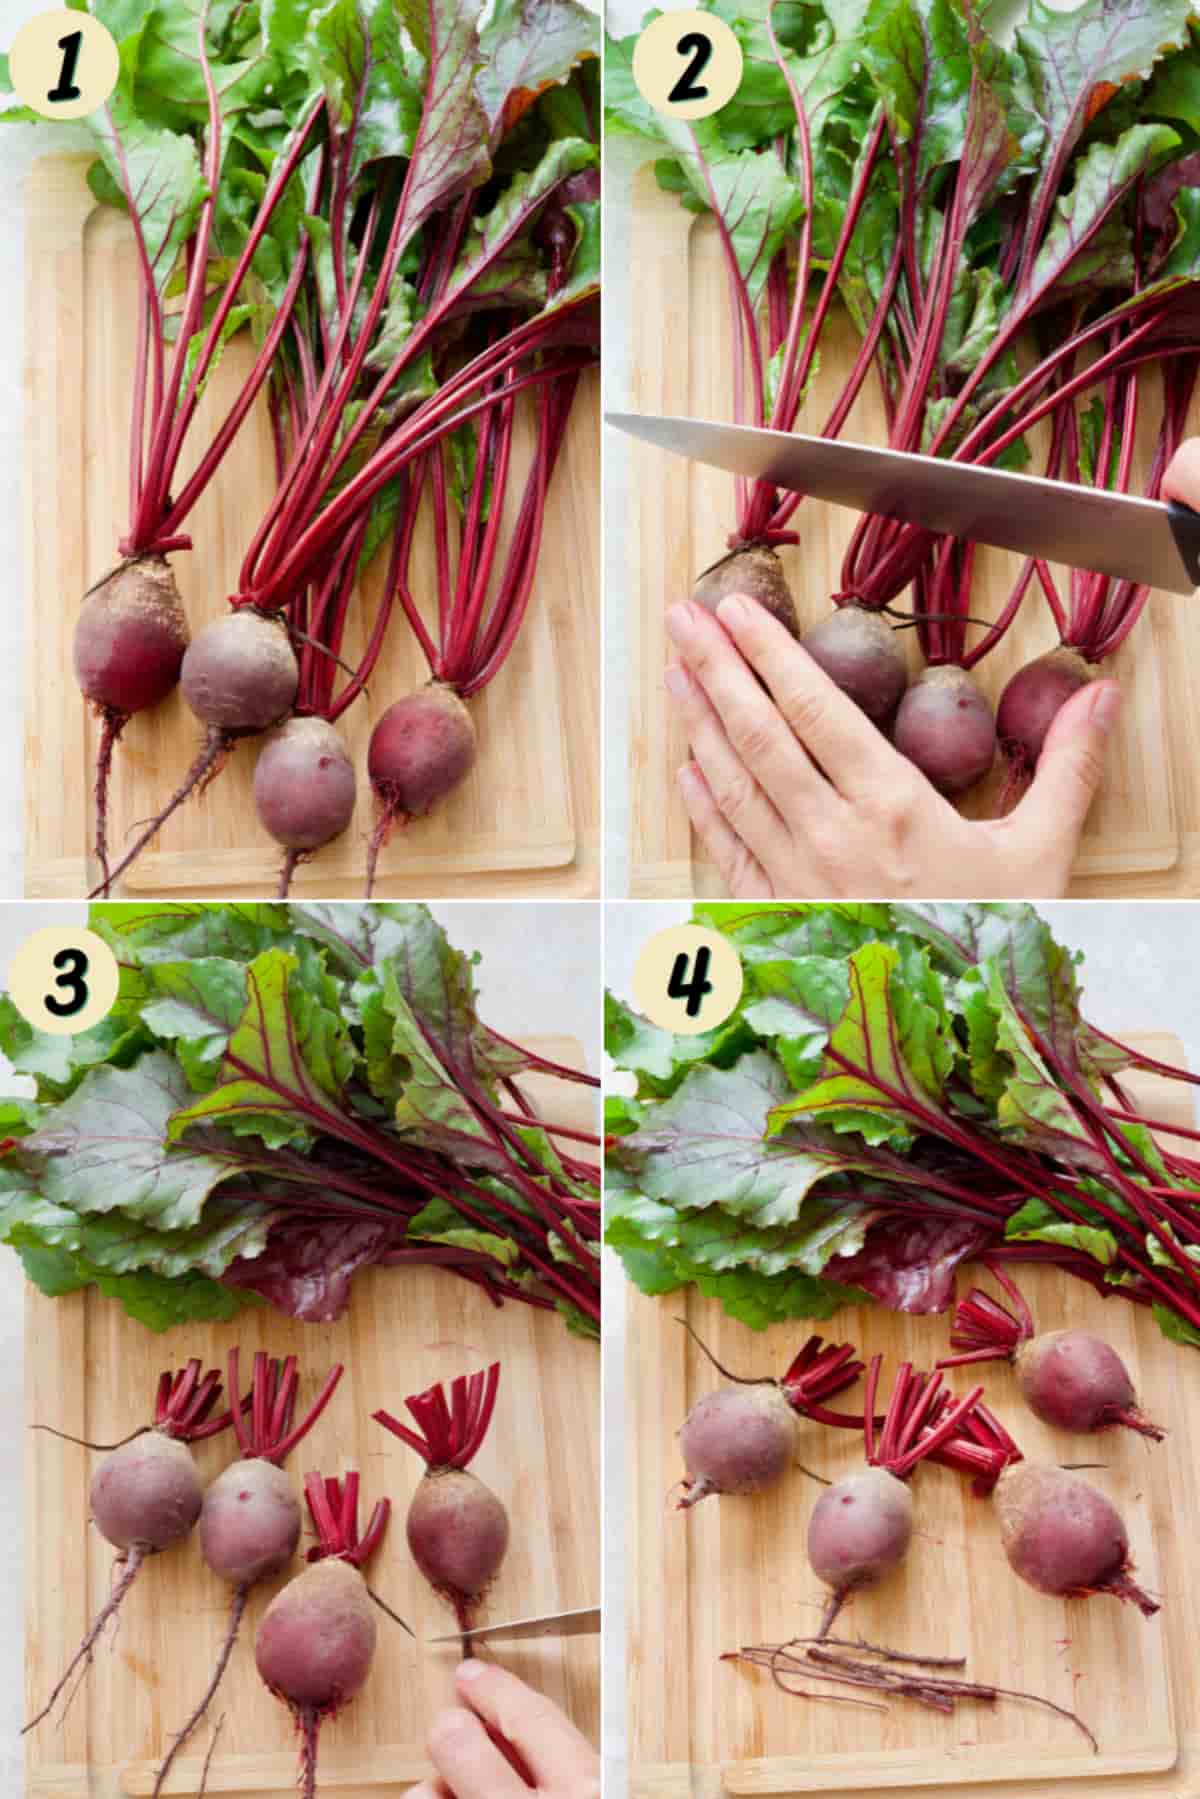 Trimming young beets.